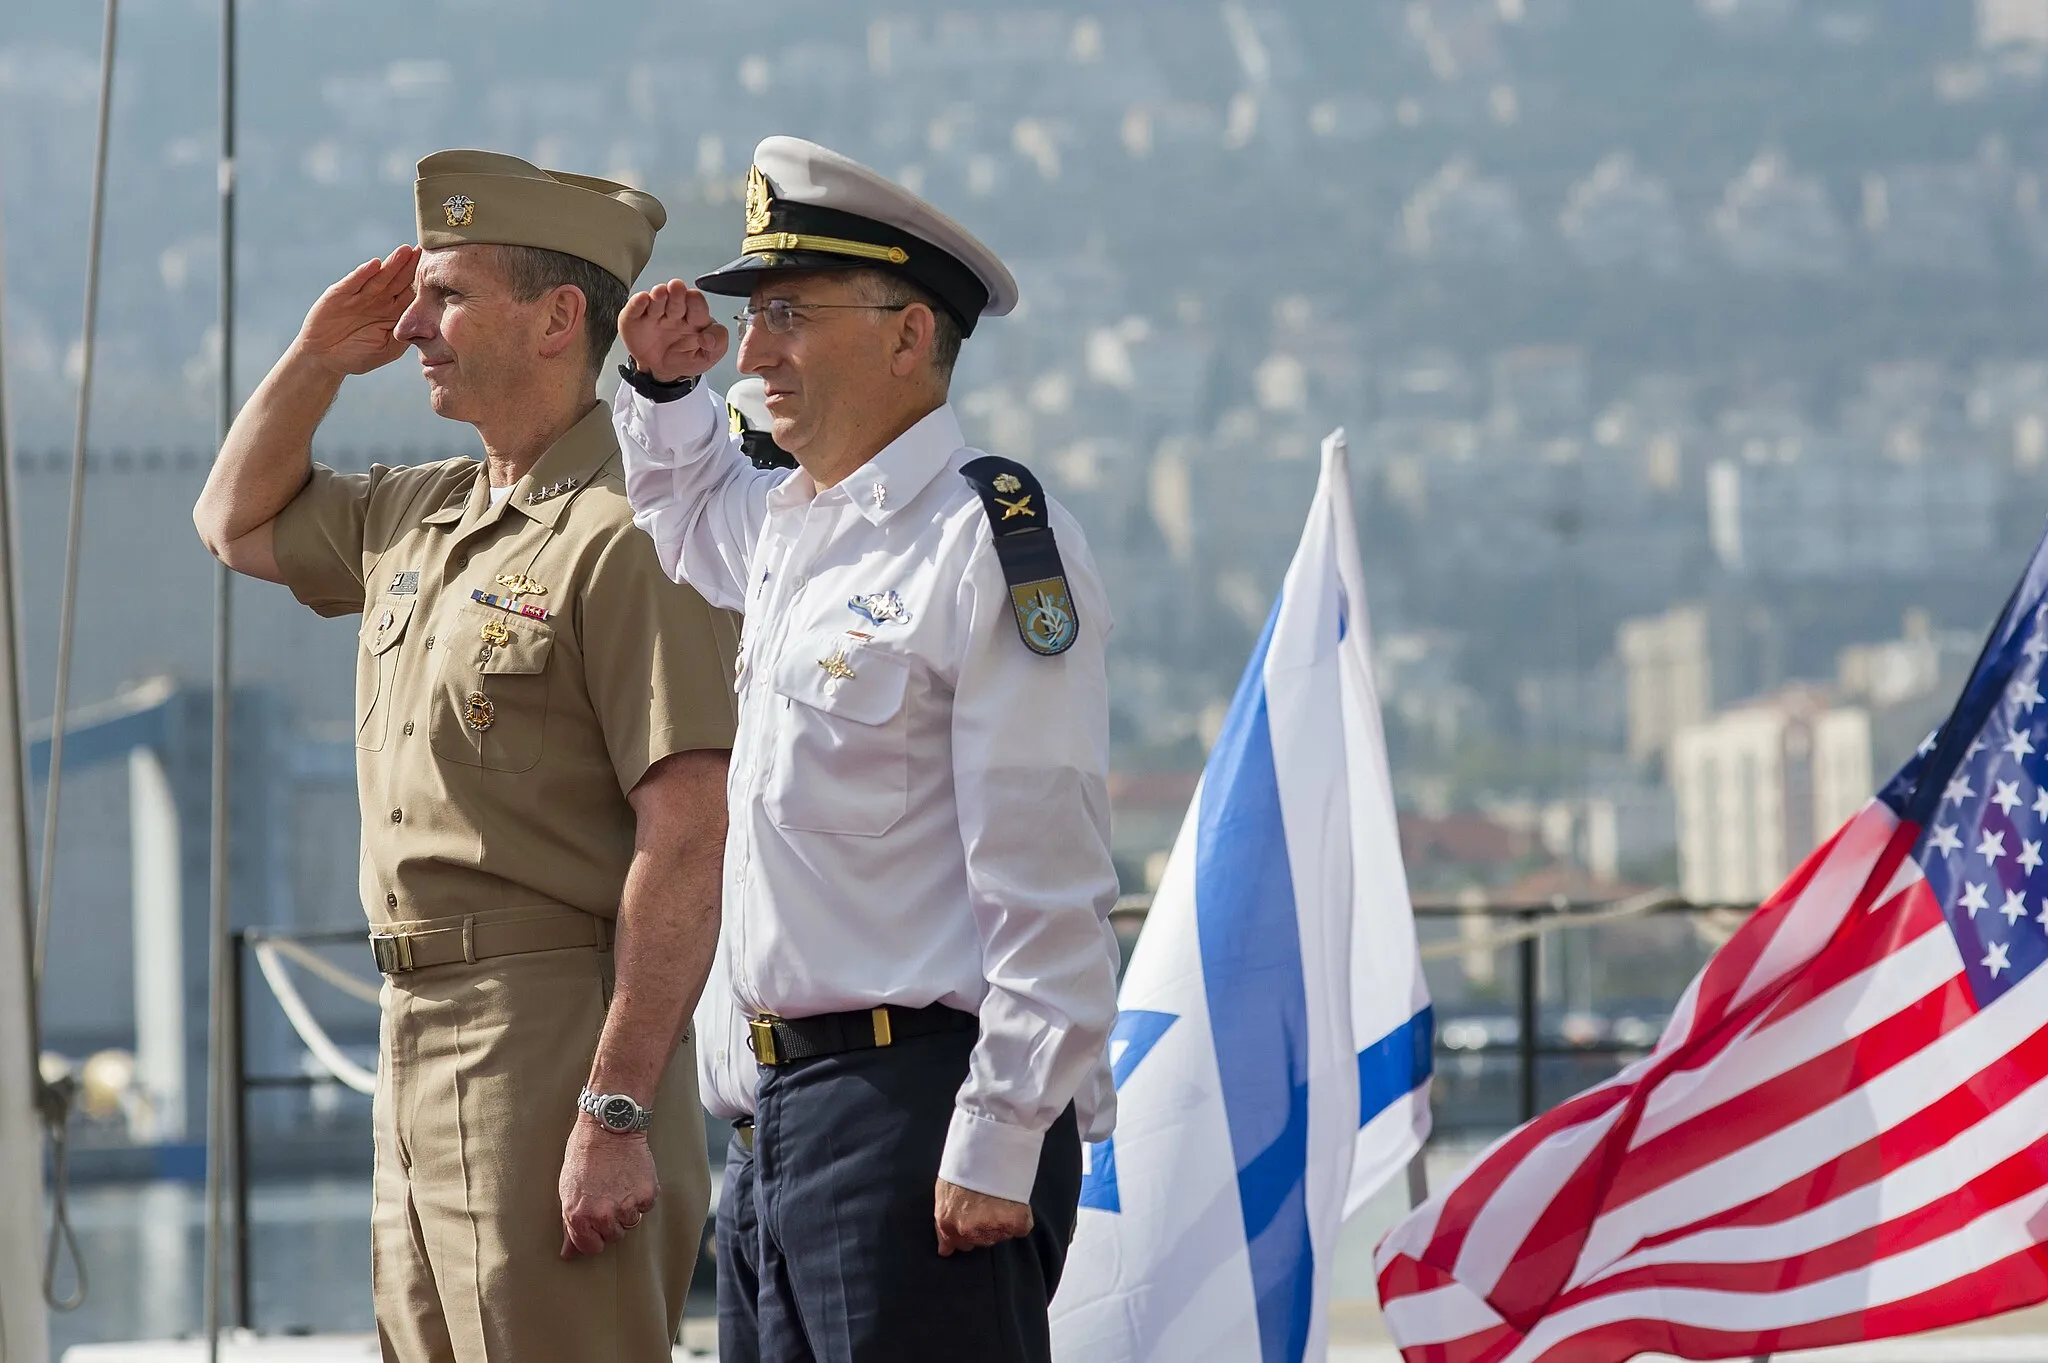 Photo showing: 131124-N-WL435-050

HAIFA, Israel (Nov. 24, 2013) Chief of Naval Operations (CNO) Adm. Jonathan Greenert salutes with the Commander in Chief of the Israel Navy Vice Adm. Ram Rutberg during a full honors ceremony to welcome him upon his arrival at Haifa Naval Base. During the visit, Greenert observed several capabilities demonstrations conducted by the IN and conducted engagement meetings with Israel Defense Force leadership. (U.S. Navy photo by Chief Mass Communication Specialist Peter D. Lawlor/Released)